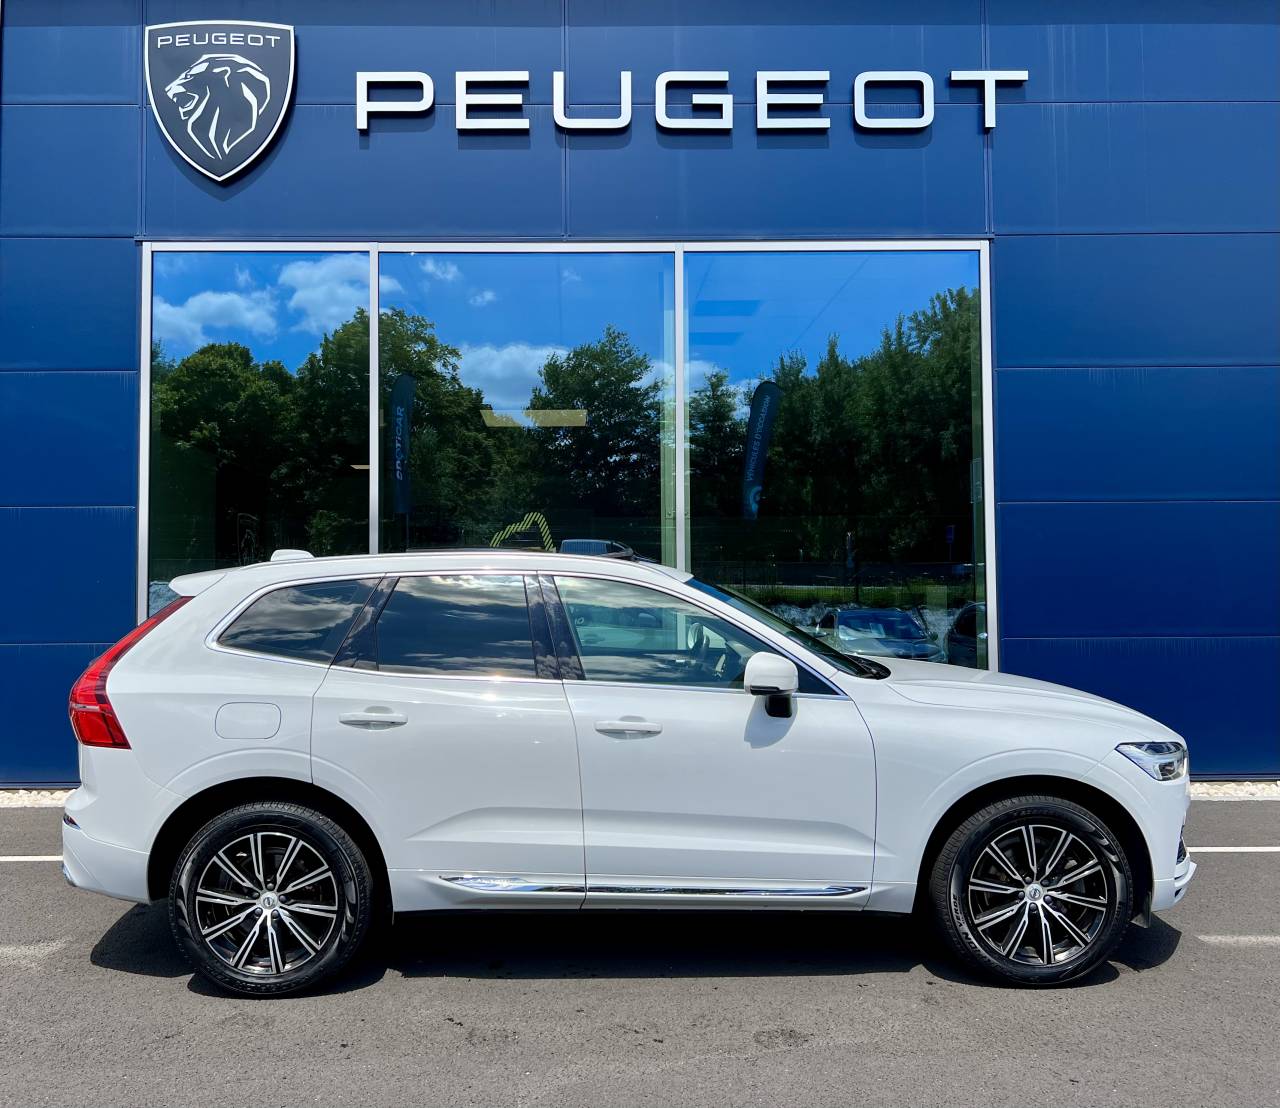 Volvo XC60 (2) T8 Twin Engine 390 GT 8 Inscription Luxe